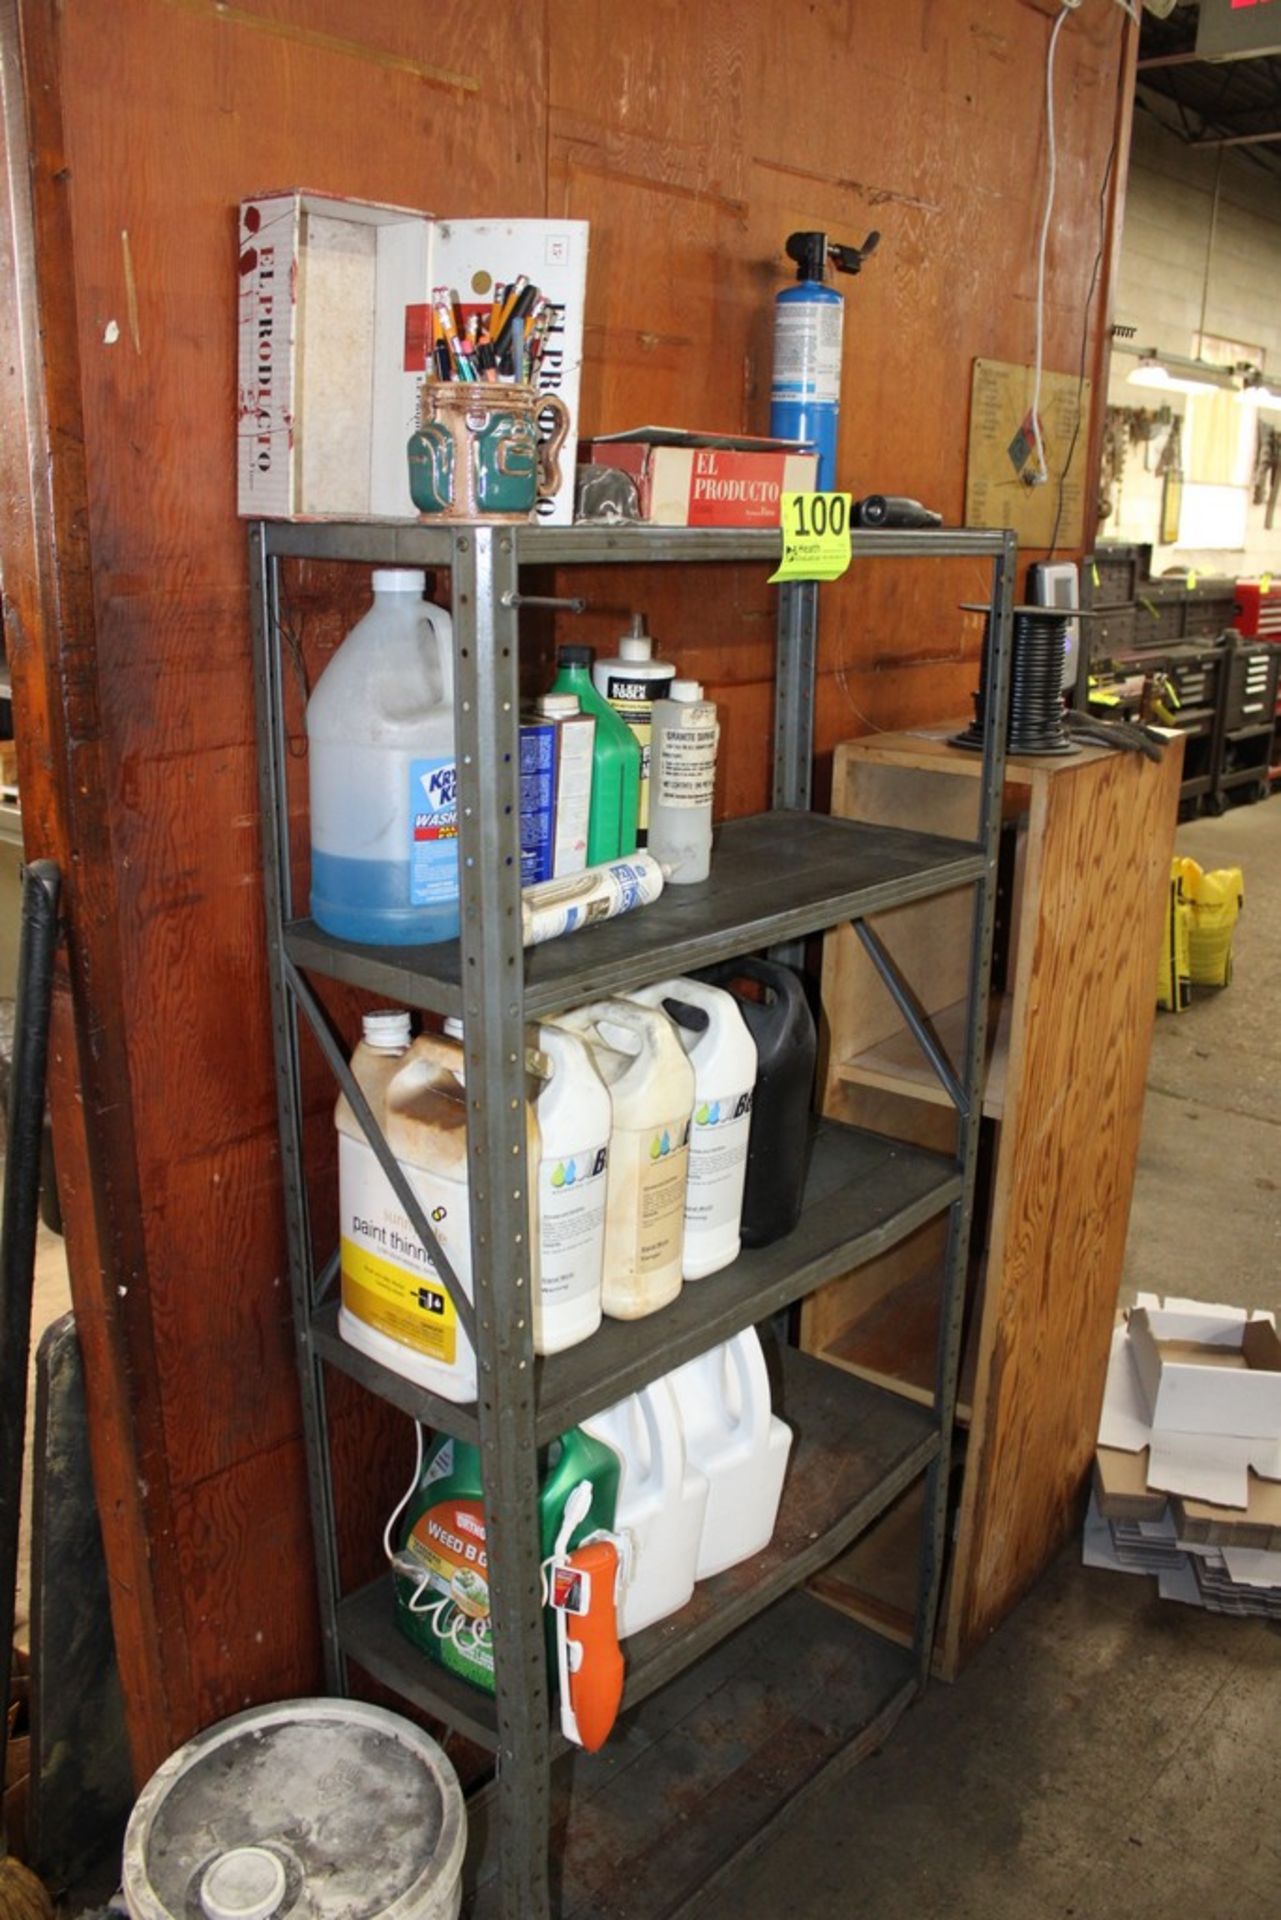 STEEL SHELVING UNIT WITH CONTENTS 30" X 12" X 60"